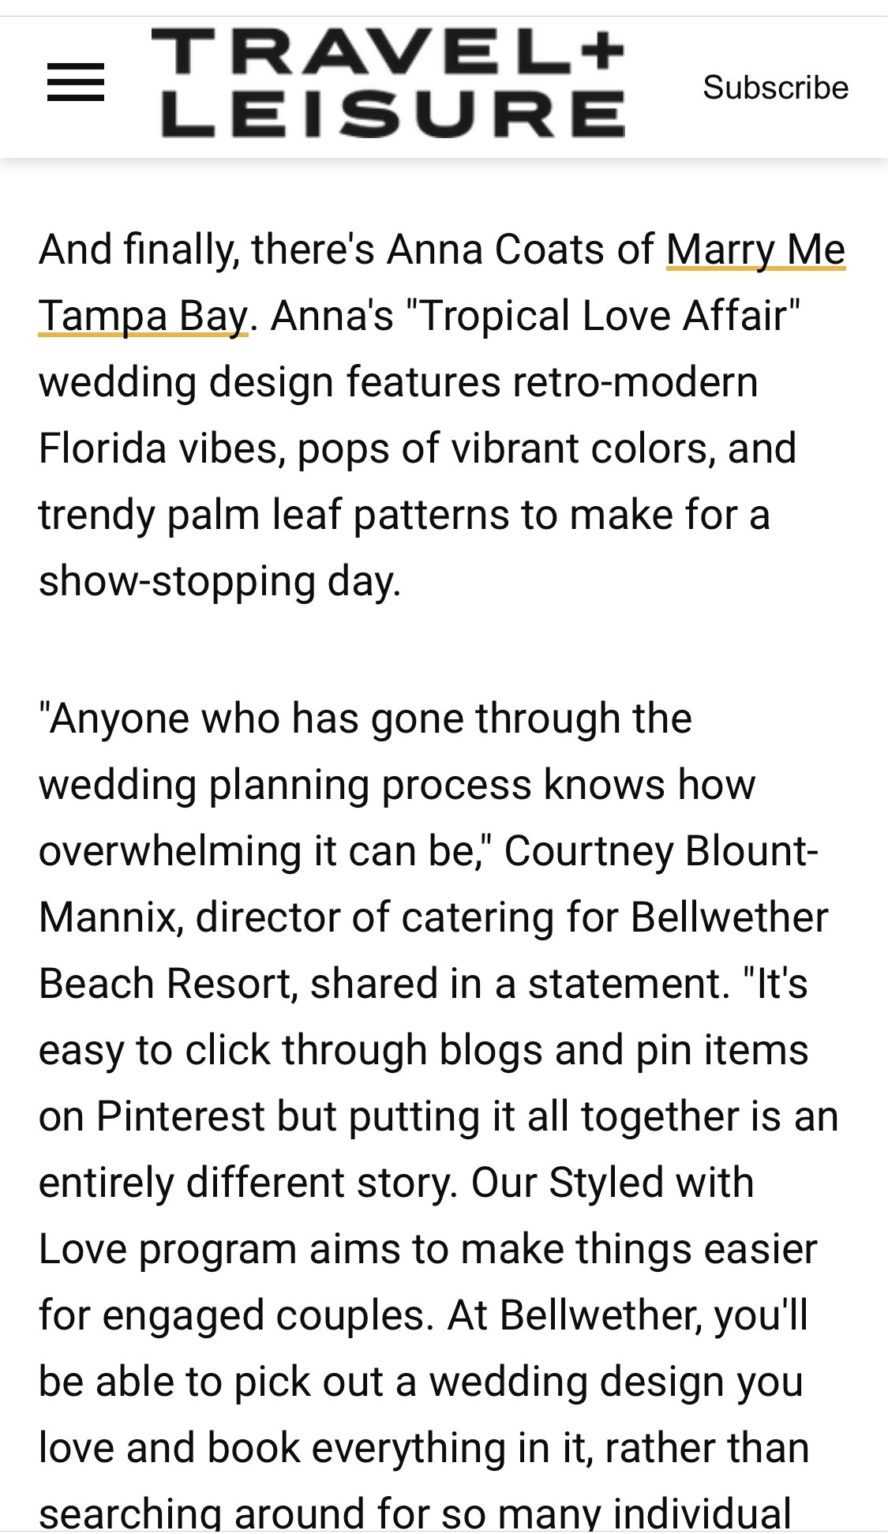 St. Pete Beach Wedding Venue Bellwether Beach Resort Styled with Love Influencer Designed Wedding by Marry Me Tampa Bay Travel + Leisure Article